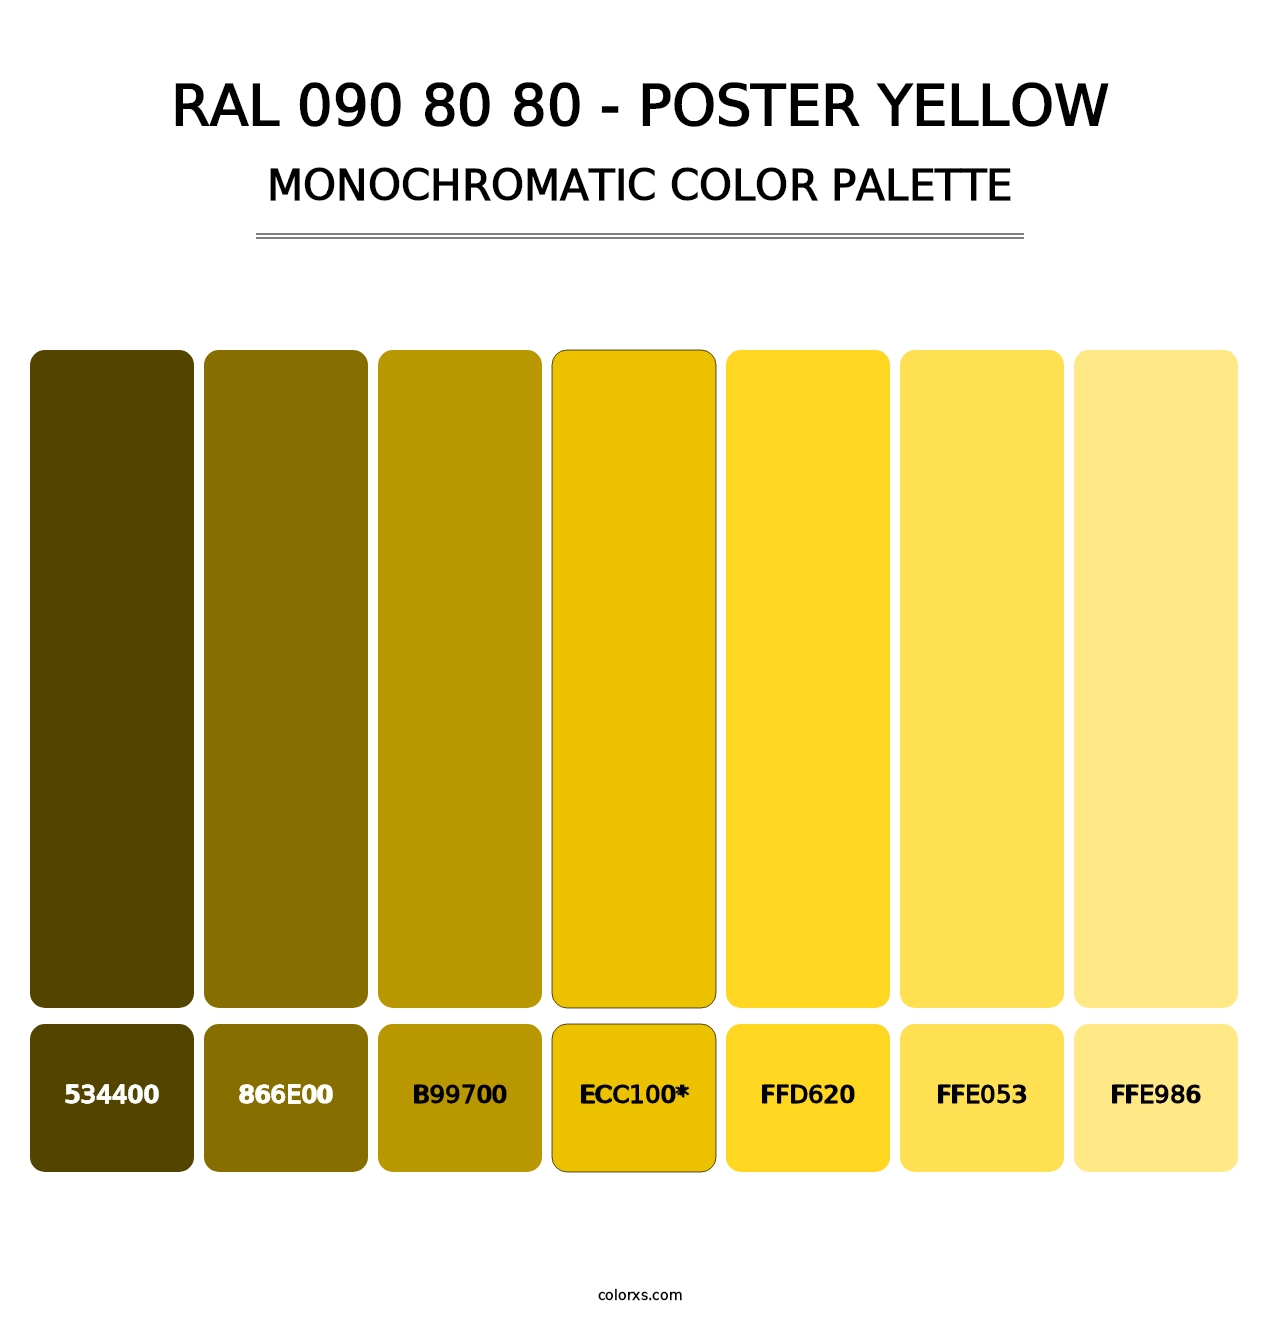 RAL 090 80 80 - Poster Yellow - Monochromatic Color Palette